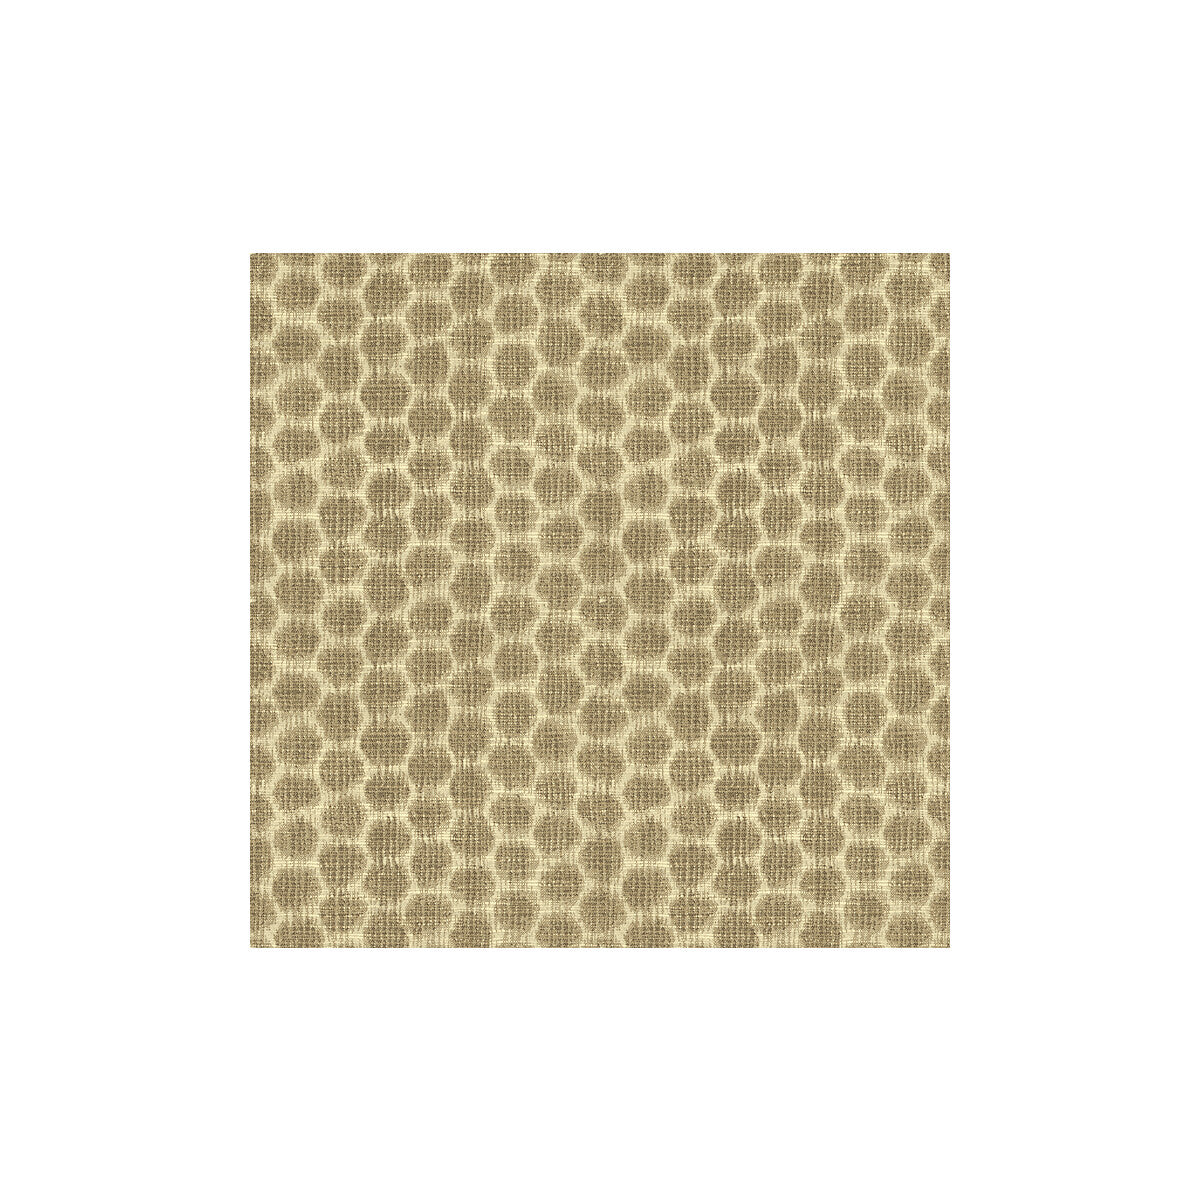 Kravet Design fabric in 33132-11 color - pattern 33132.11.0 - by Kravet Design in the Echo Heirloom India collection